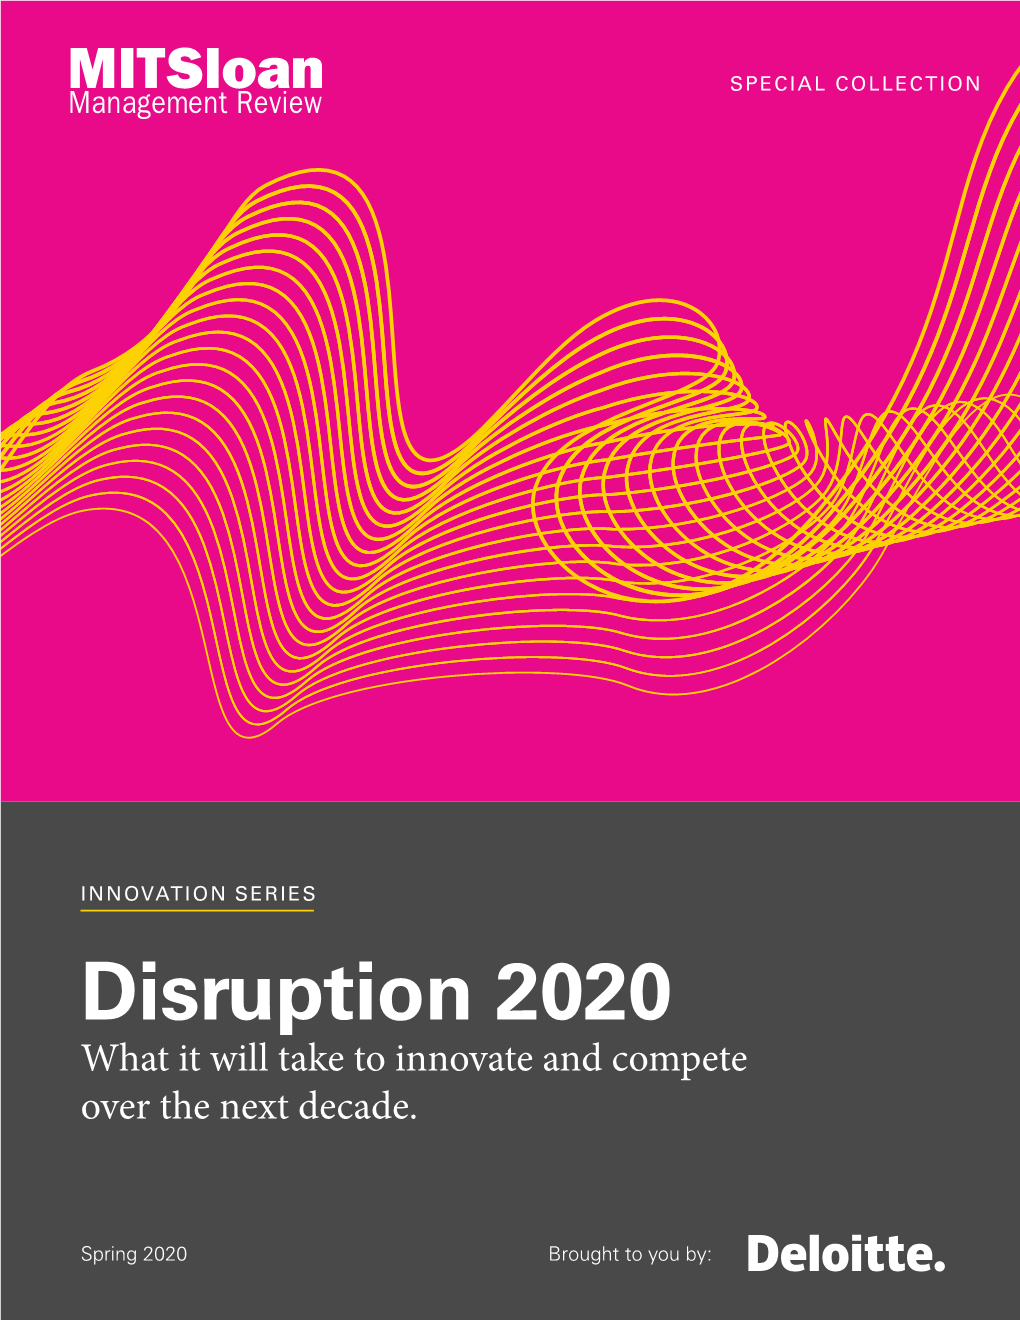 Disruption 2020 What It Will Take to Innovate and Compete Over the Next Decade